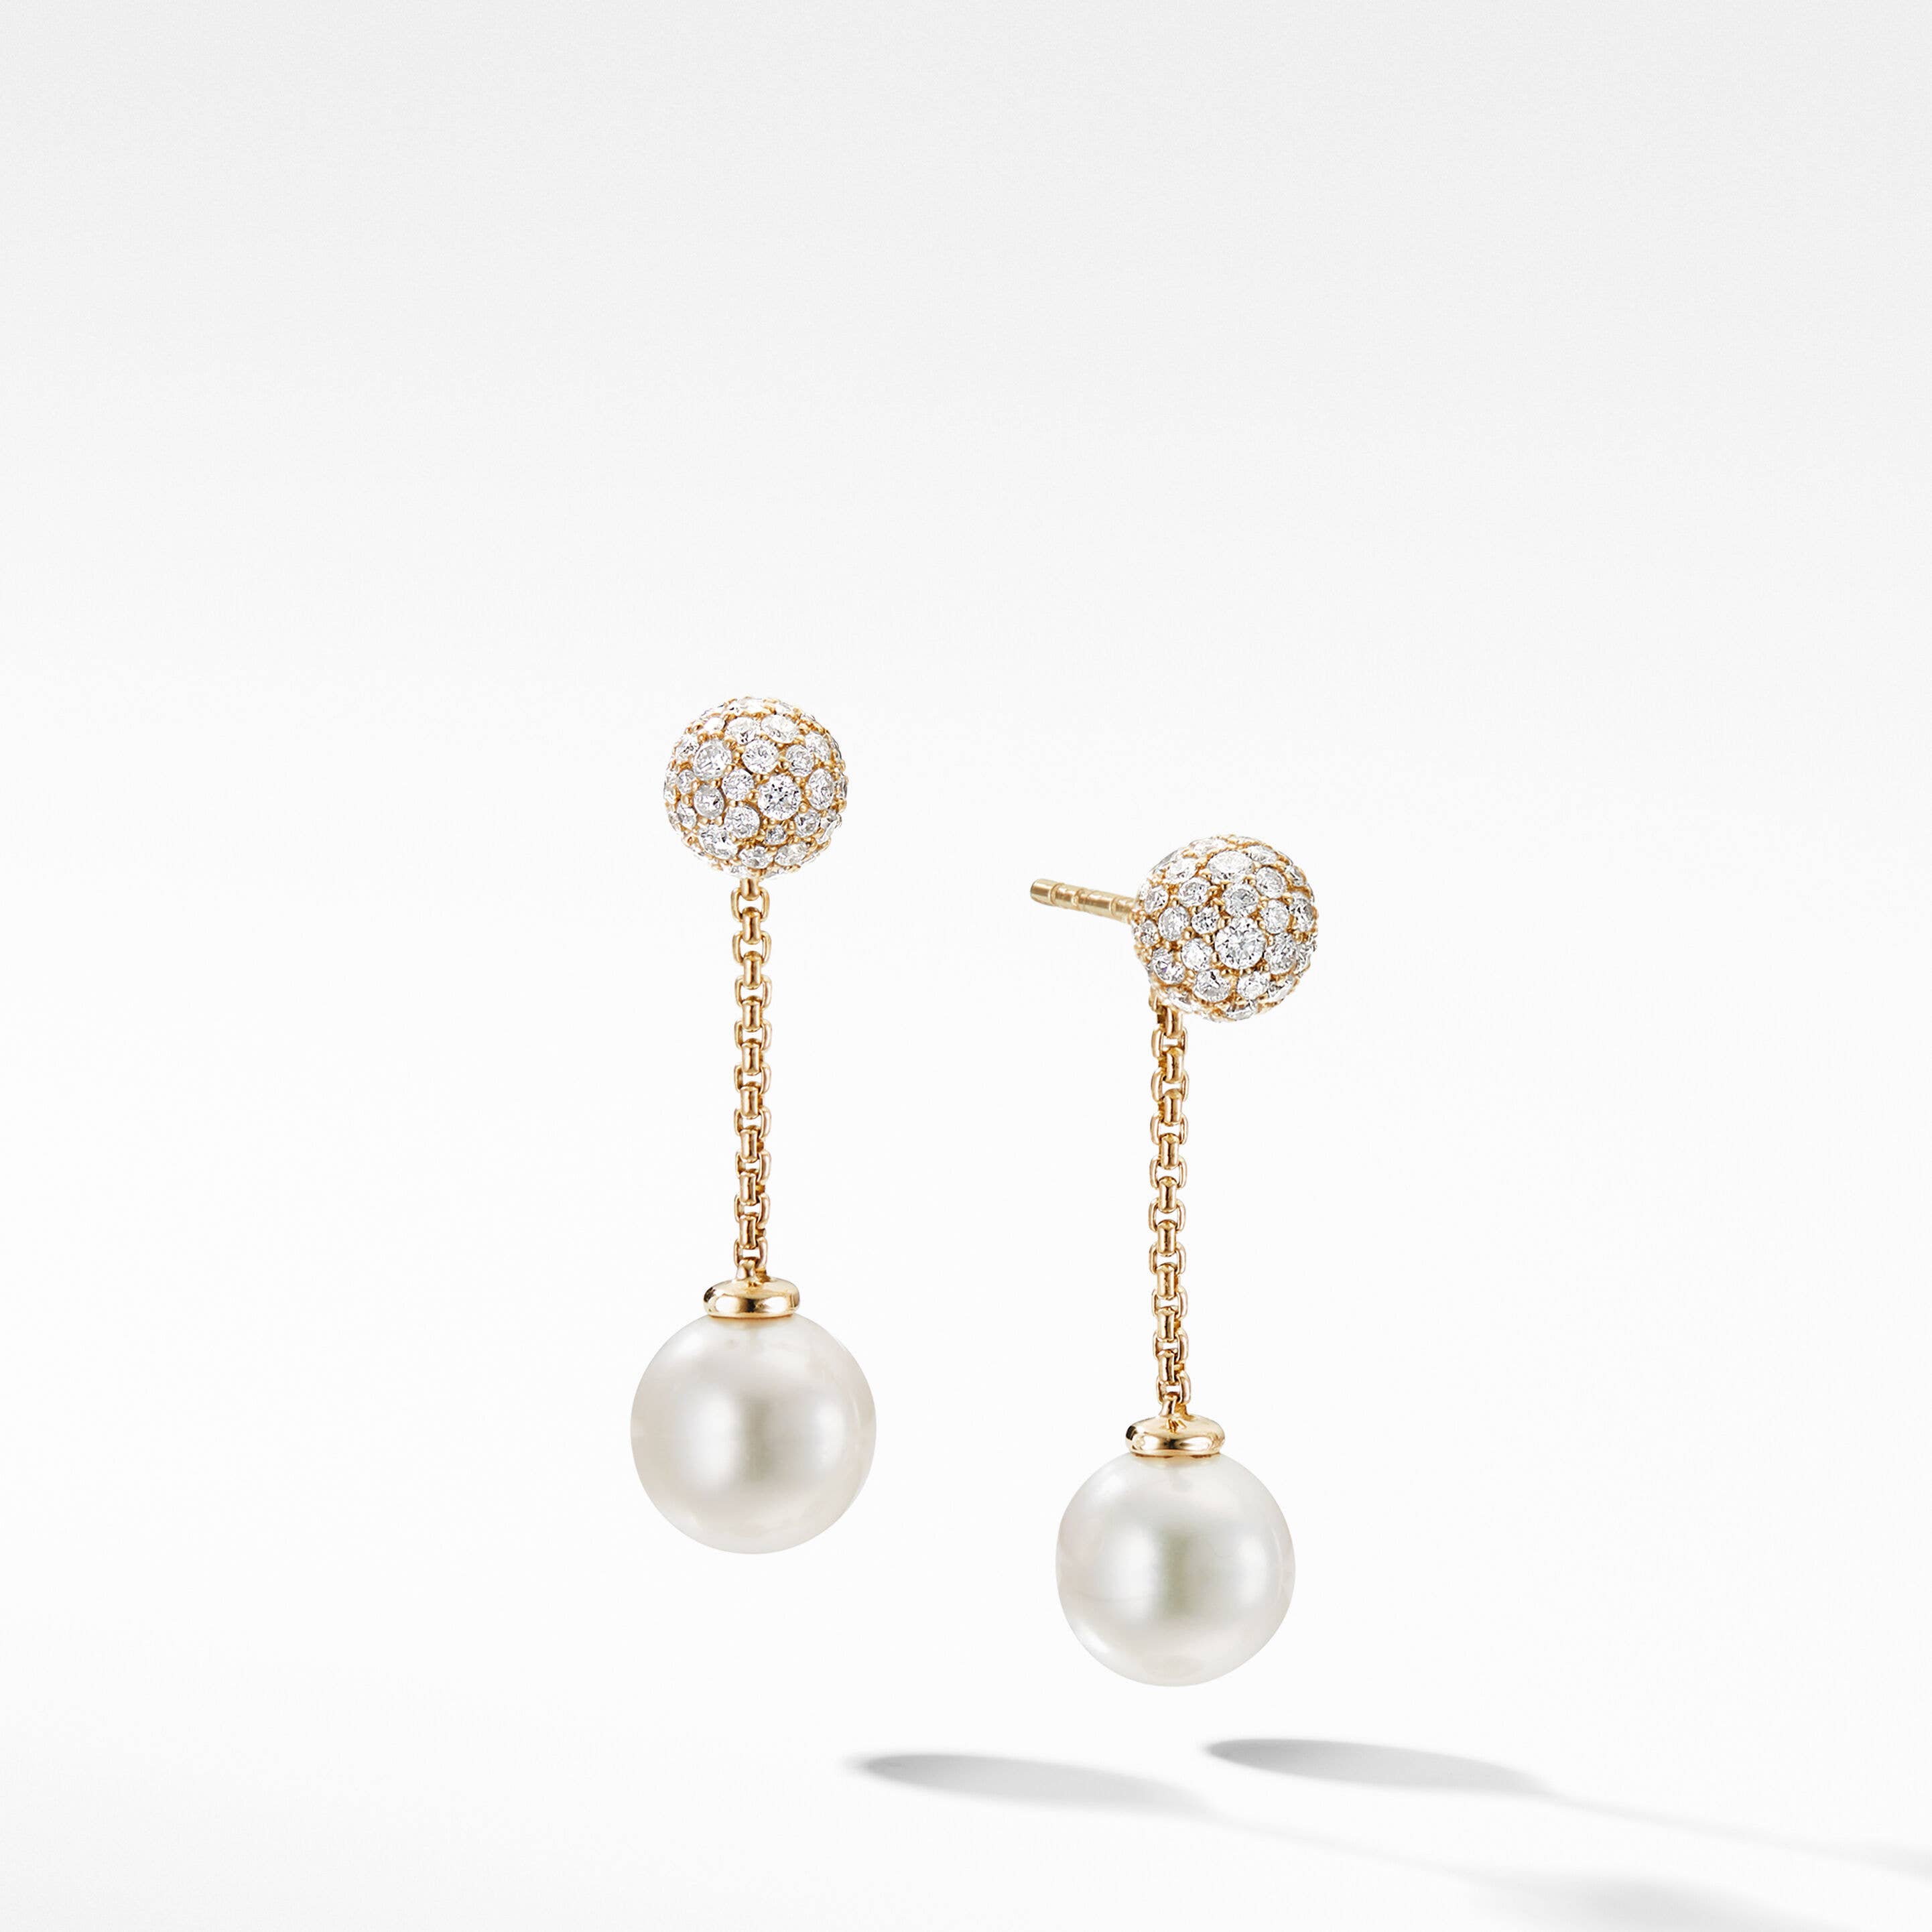 Solari Chain Drop Earrings in 18K Yellow Gold with Pearls and Pavé Diamonds